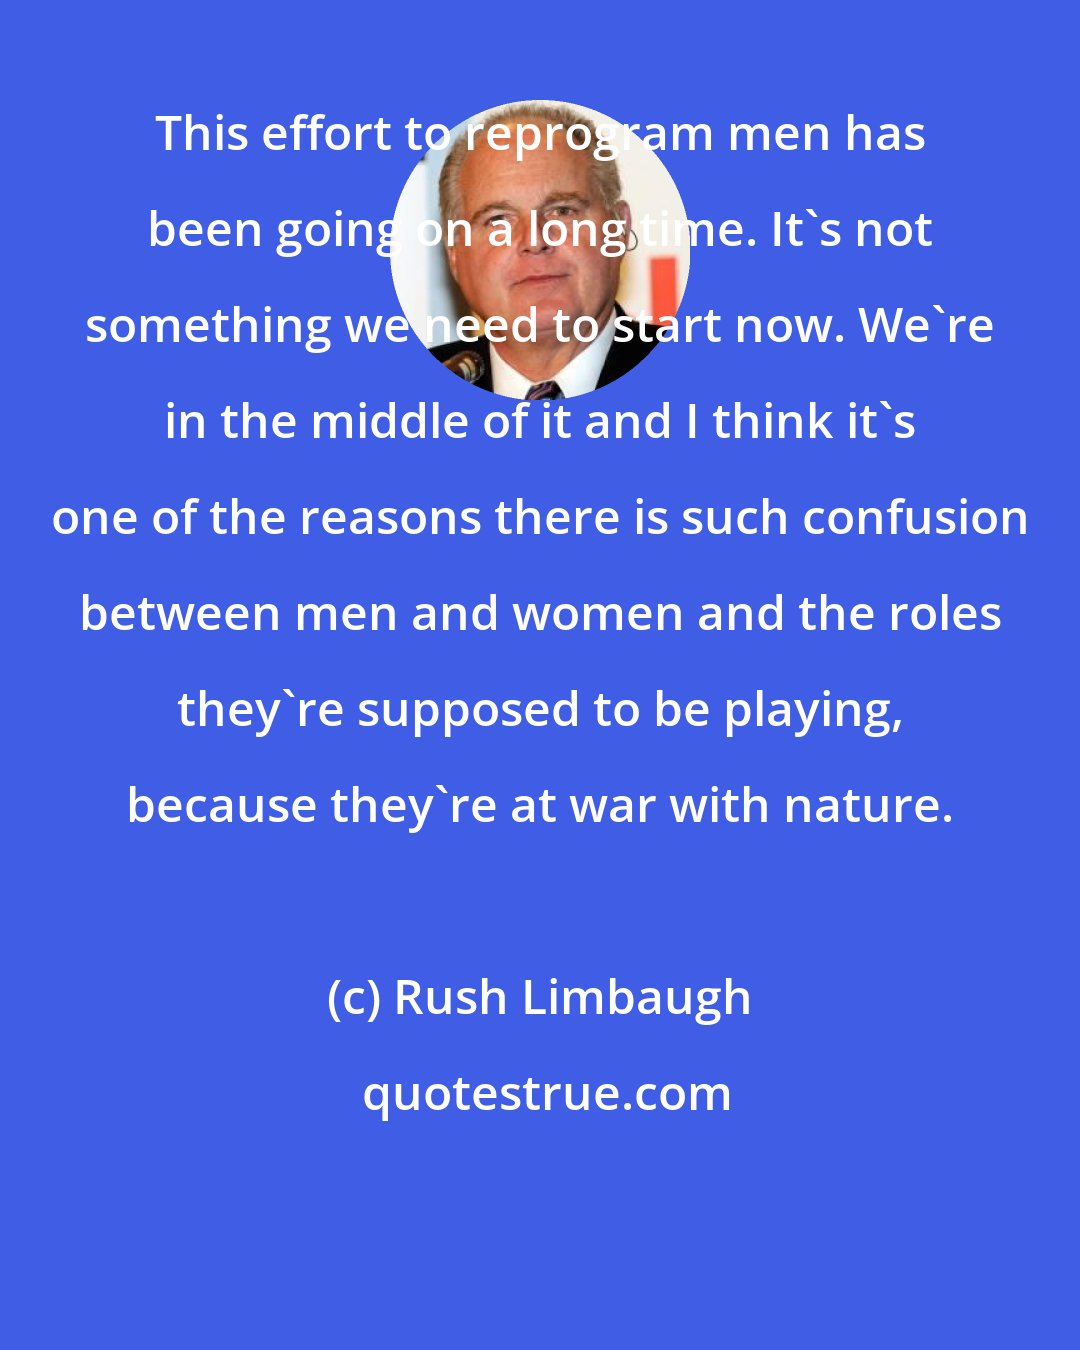 Rush Limbaugh: This effort to reprogram men has been going on a long time. It's not something we need to start now. We're in the middle of it and I think it's one of the reasons there is such confusion between men and women and the roles they're supposed to be playing, because they're at war with nature.